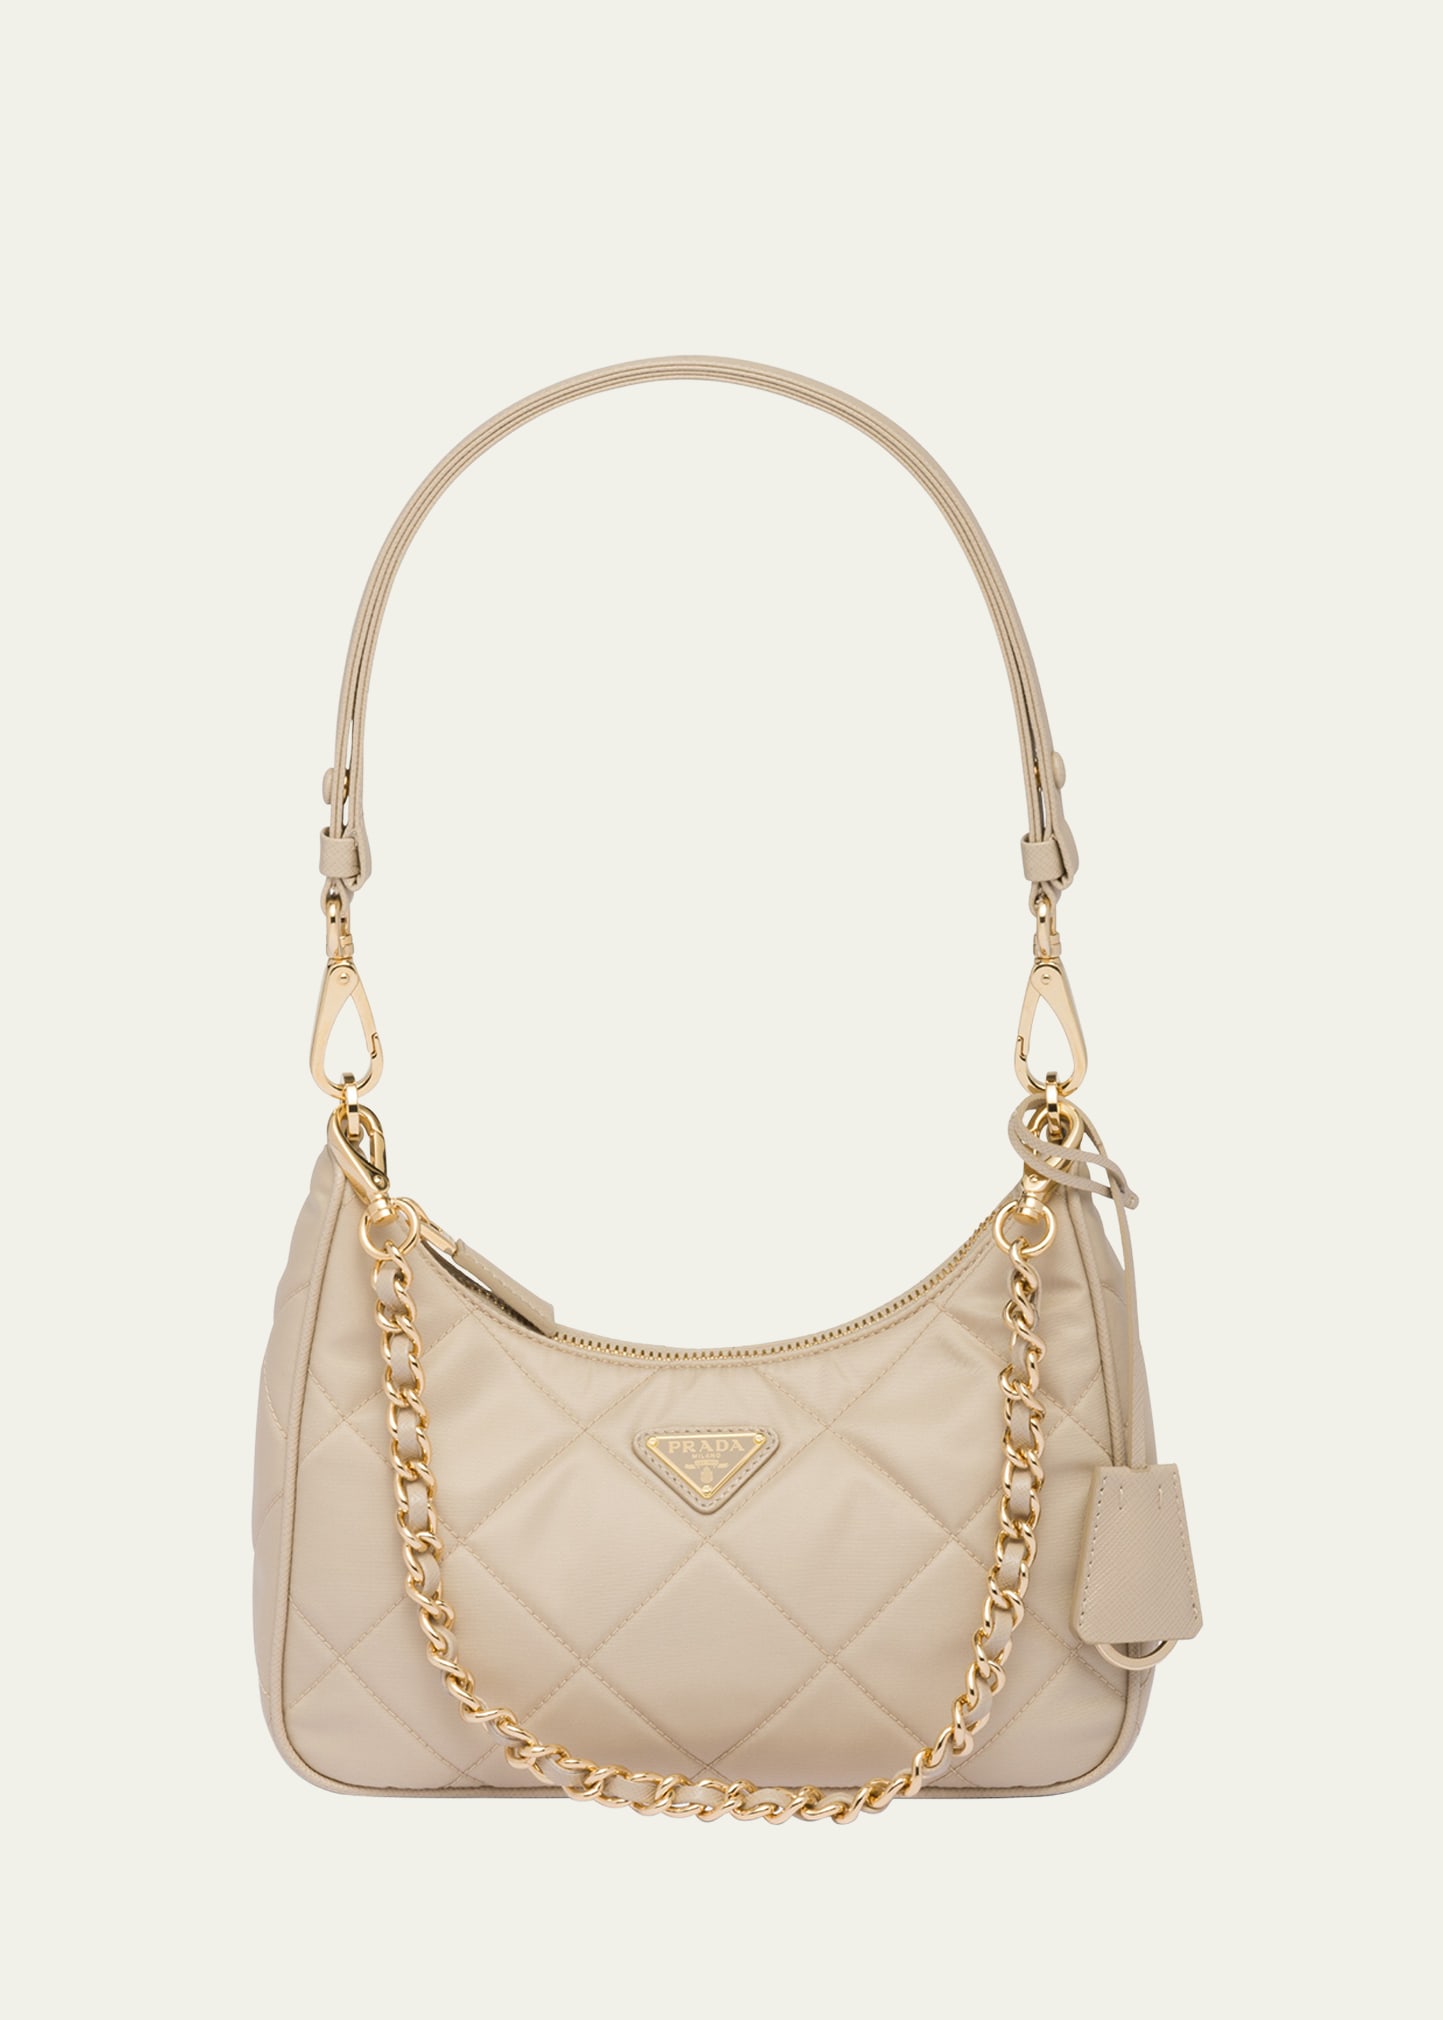 Prada Re-Edition 1995 Quilted Chain Shoulder Bag - Bergdorf Goodman